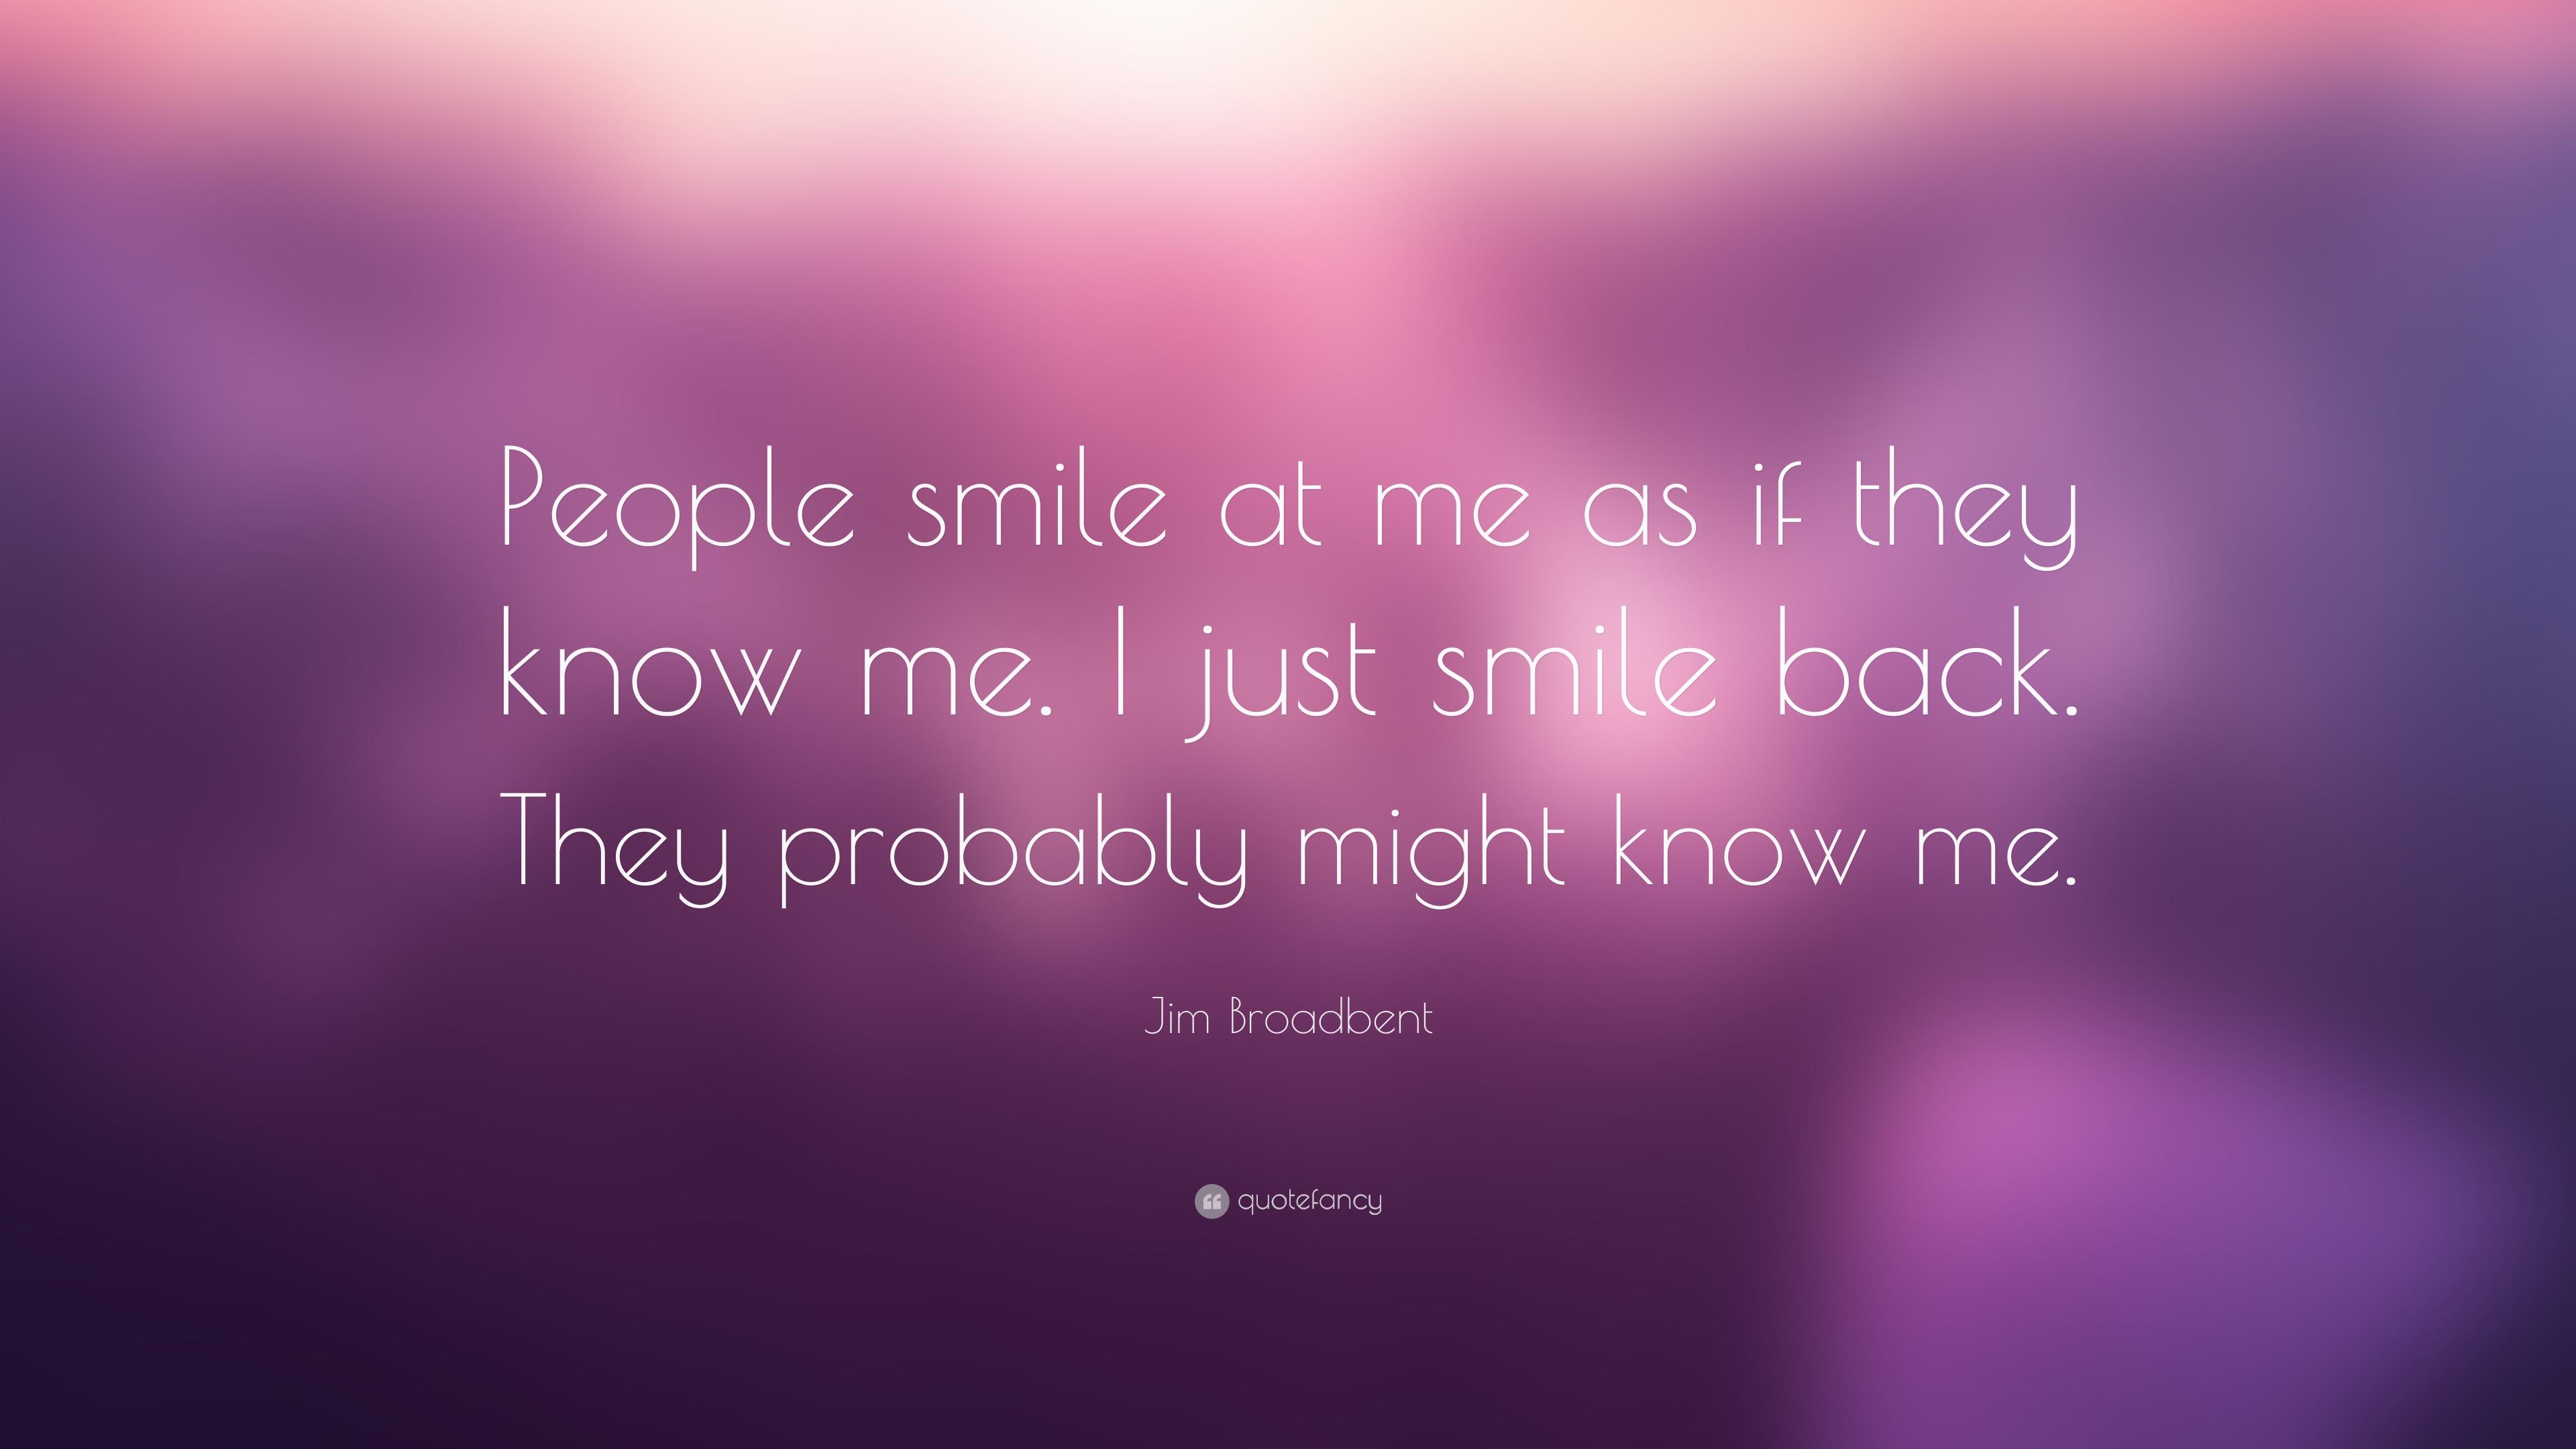 Jim Broadbent Quote: “People smile at me as if they know me. I just